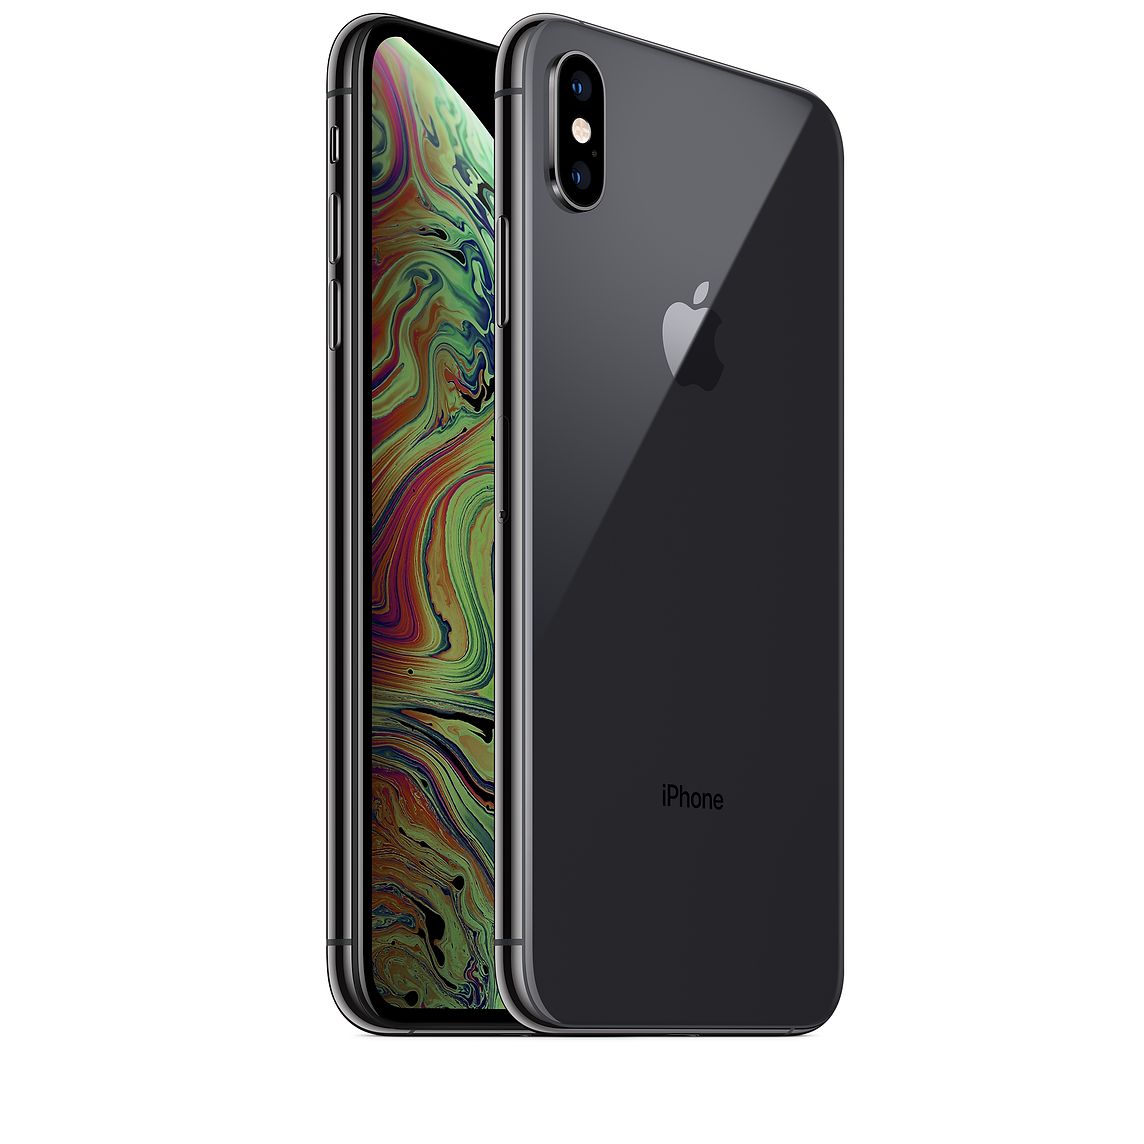 iPhone XS Max 256GB Pre-Owned - Gen Mobile